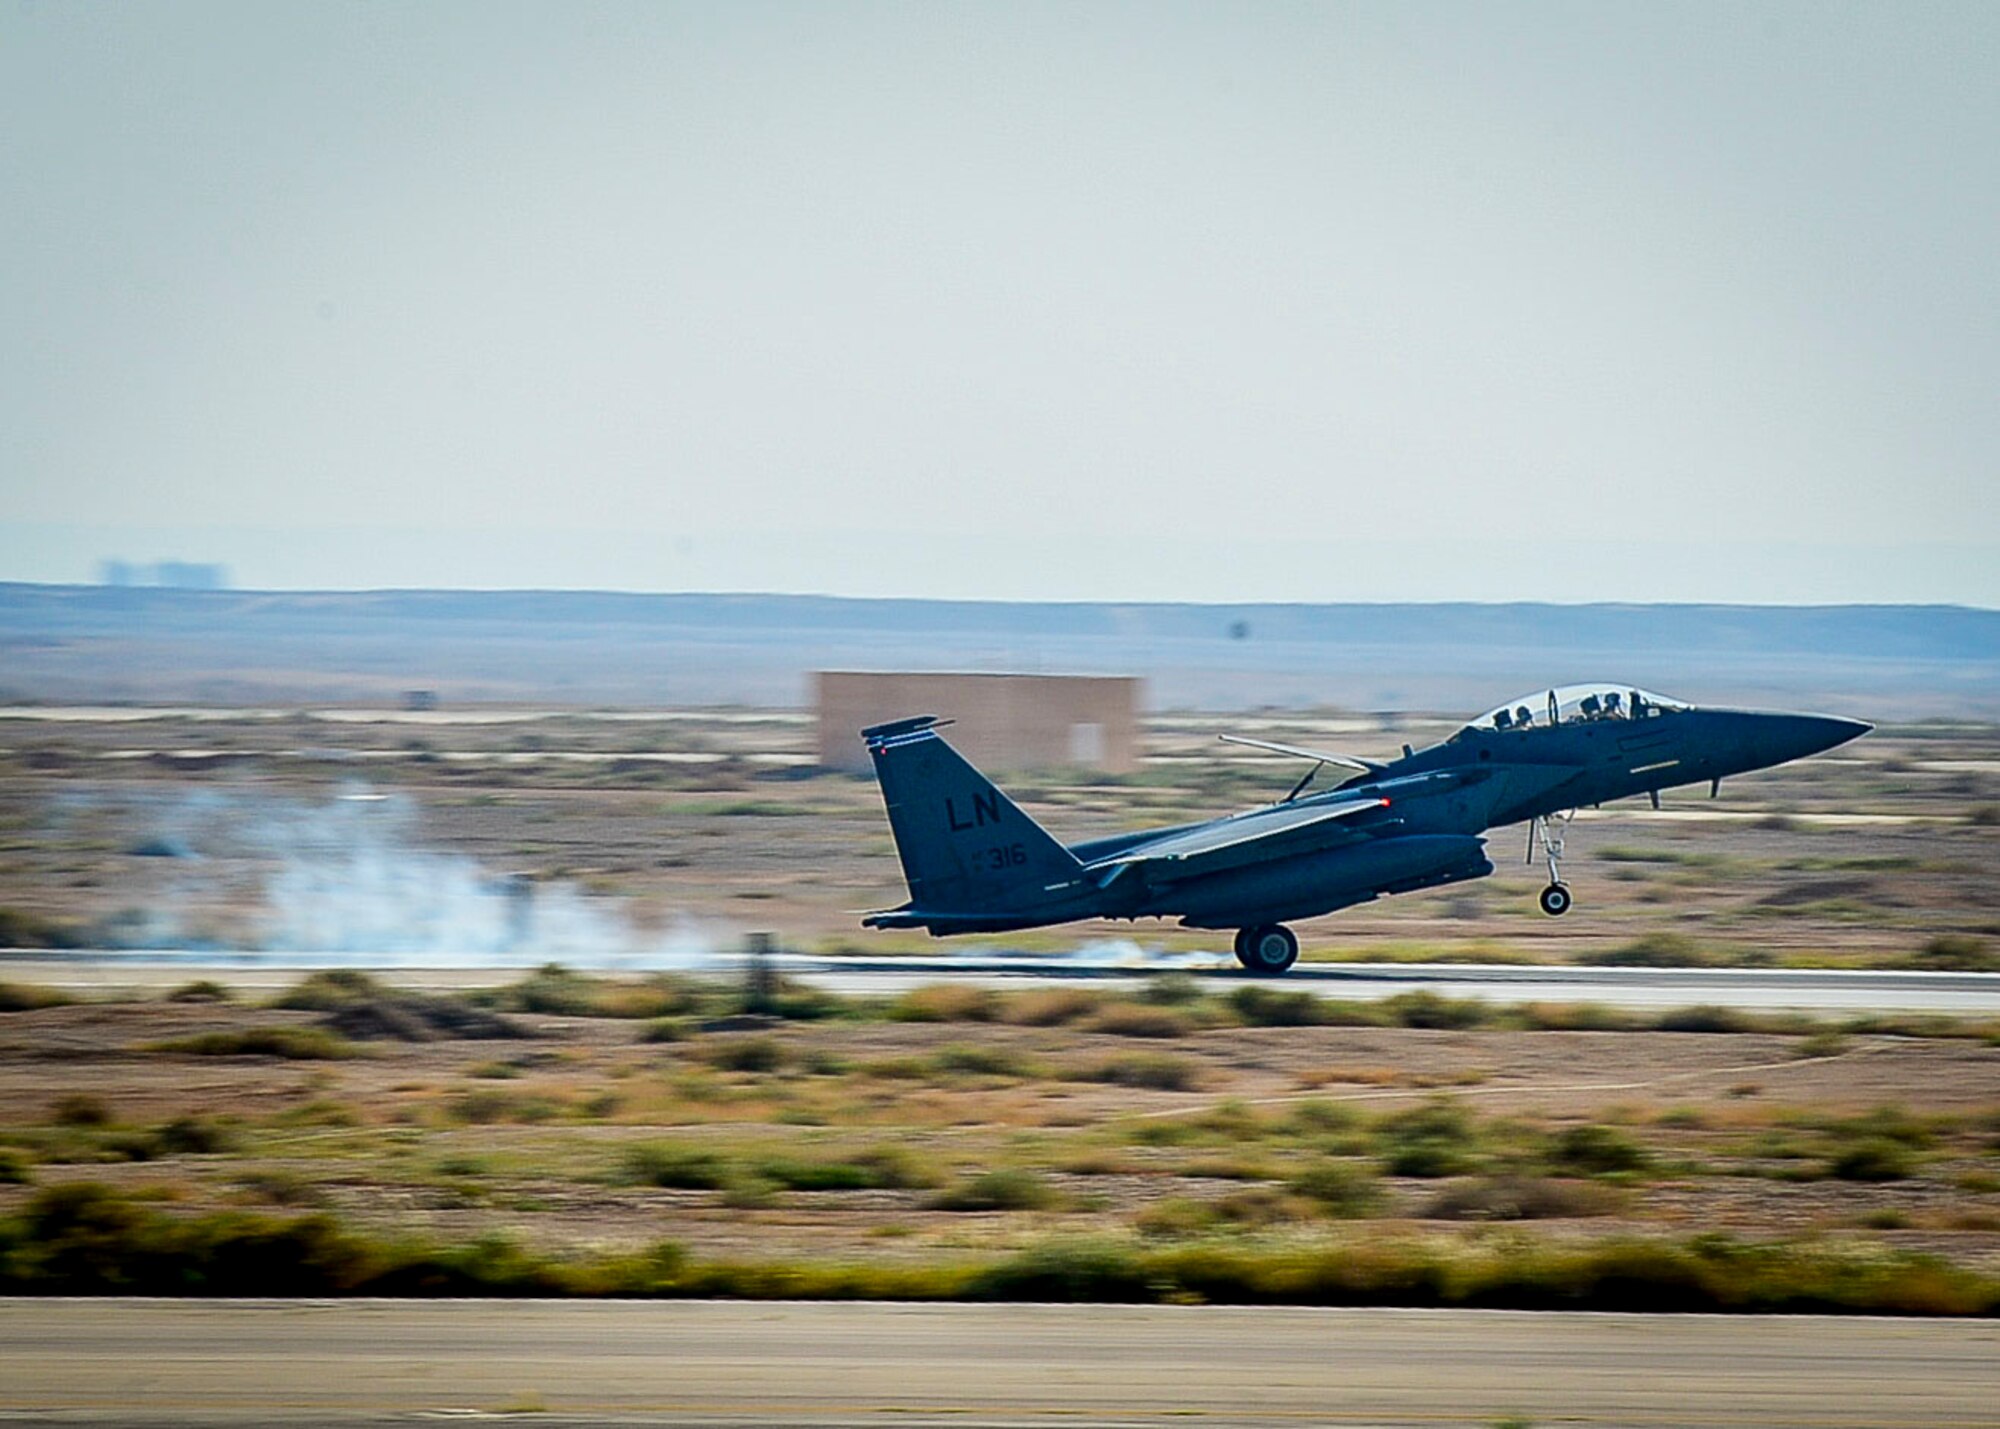 An F-15E Strike Eagle lands at an undisclosed location in Southwest Asia, April 7, 2017. The jet is deployed from the 492nd Fighter Squadron at RAF Lakenheath, England. The 492nd Expeditionary Fighter Squadron has taken over for the 389th EFS that was deployed to the 332nd Air Expeditionary Wing for the last six months. (U.S. Air Force photo by Tech Sgt. Eboni Reams)